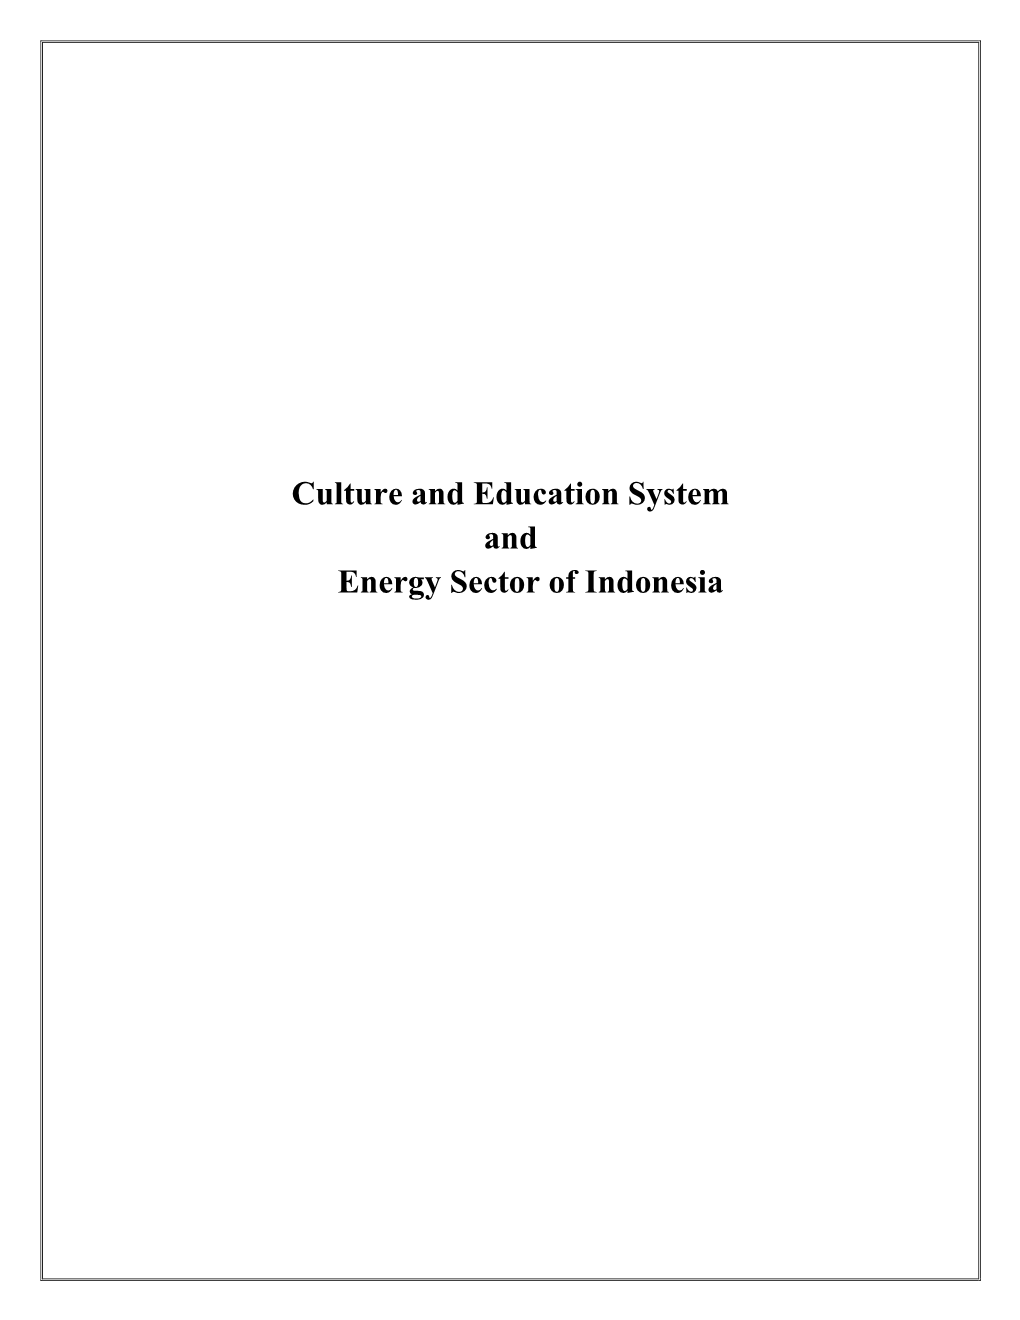 Culture and Education System and Energy Sector of Indonesia